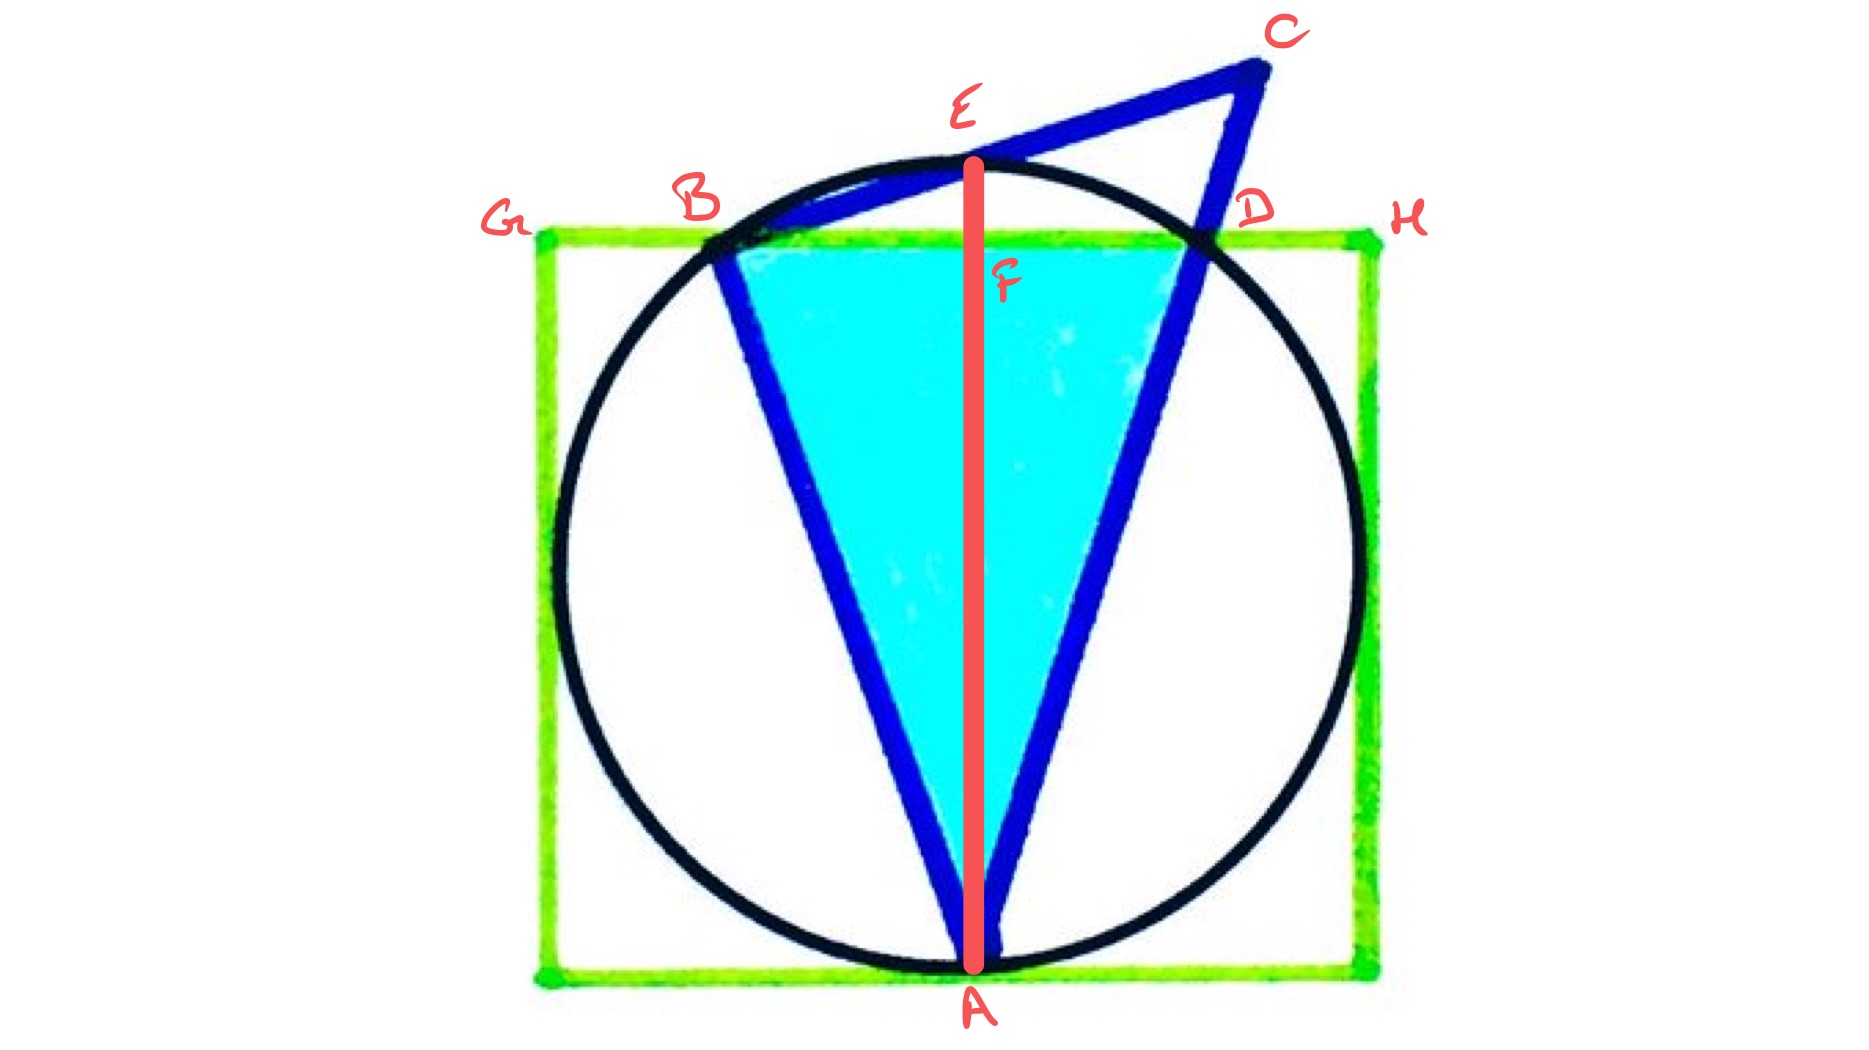 Rectangle, circle, and triangle labelled